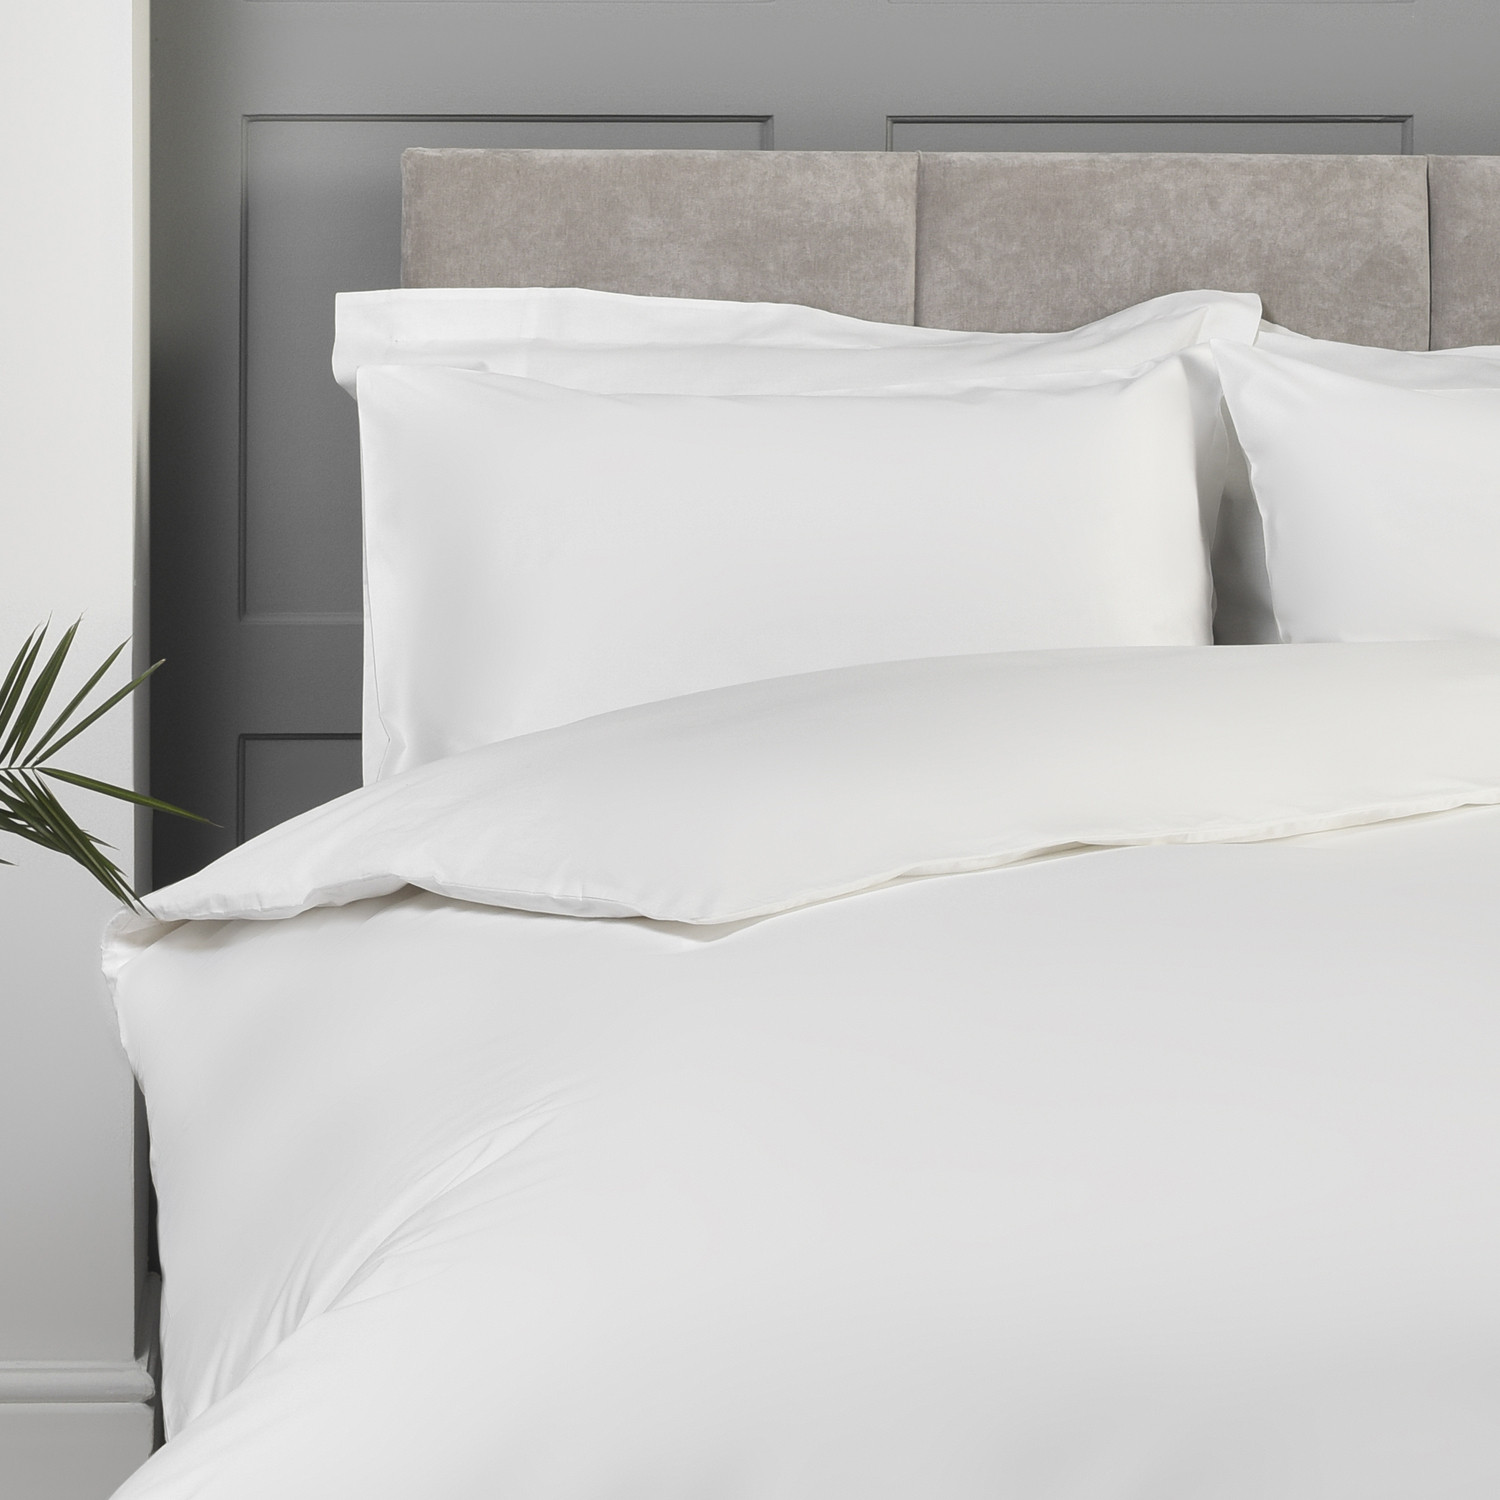 Divante Super King White Fitted Bed Sheet Image